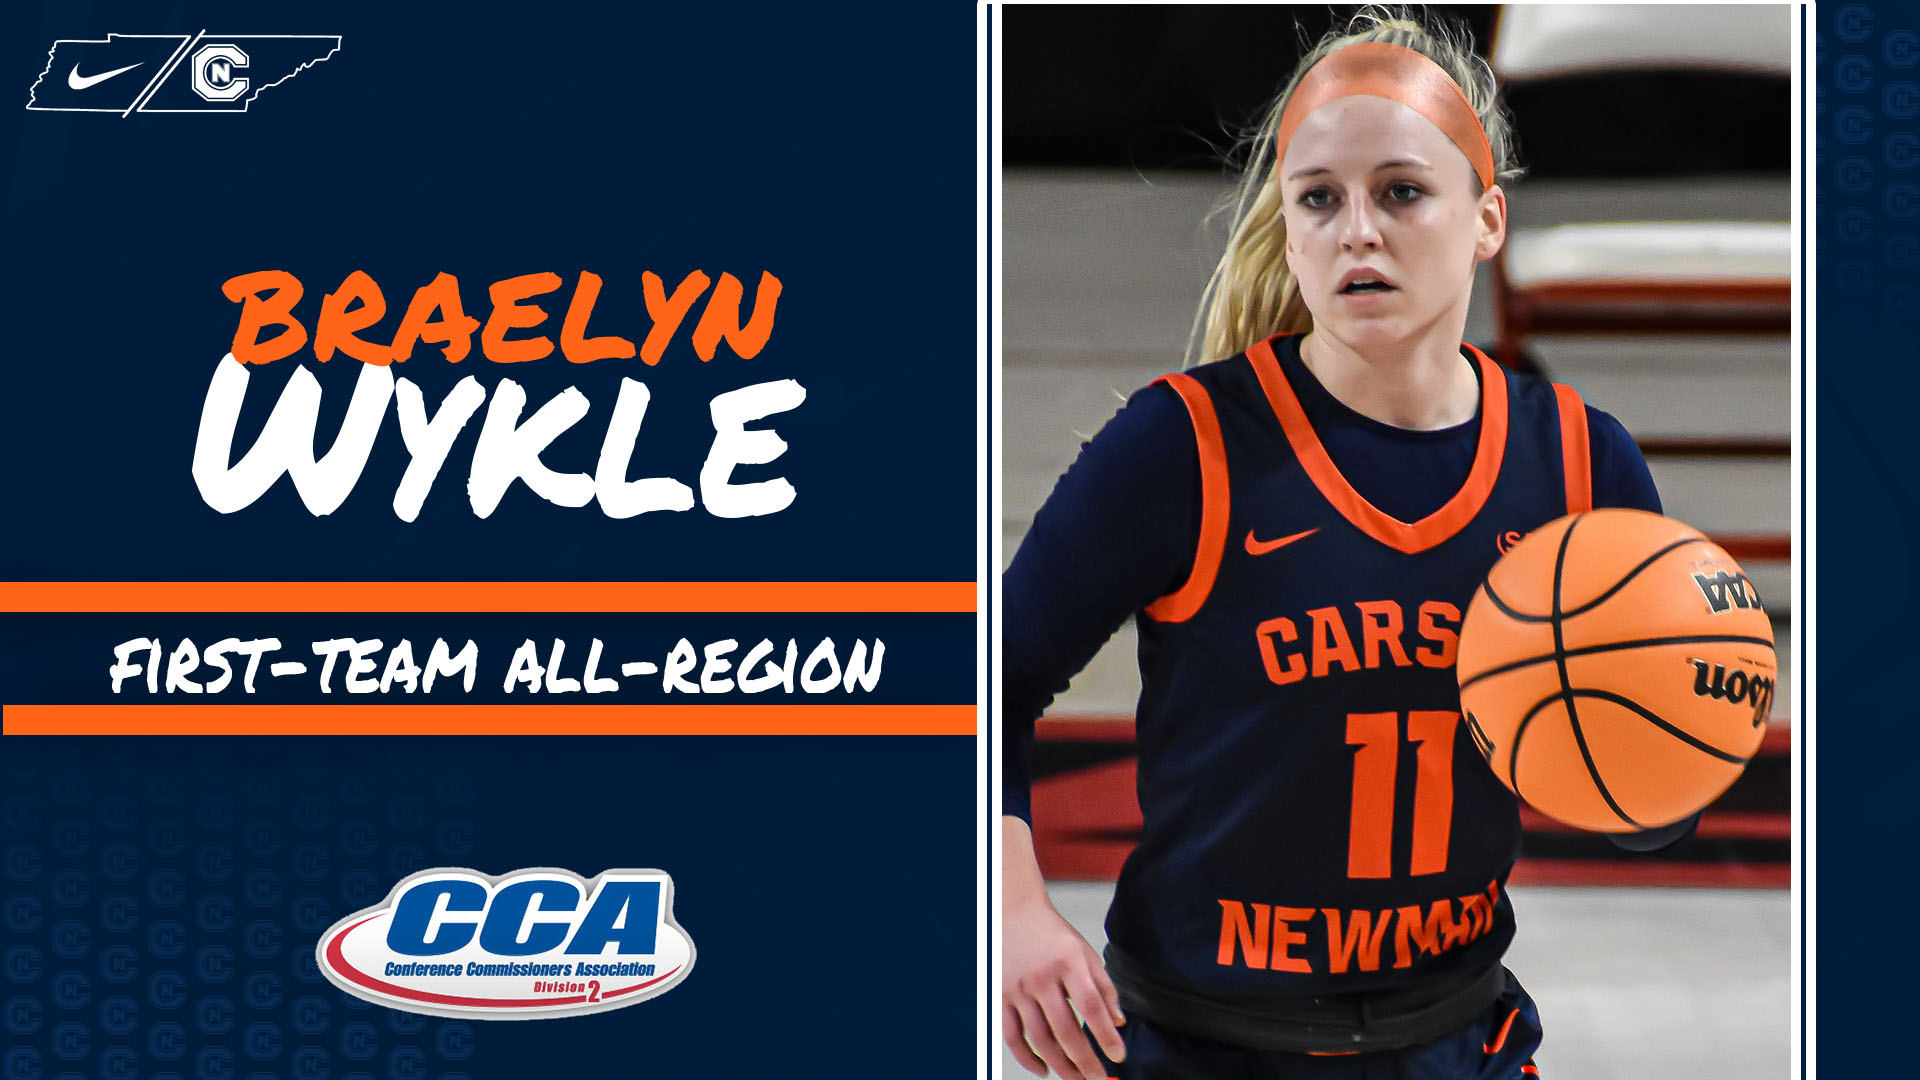 Wykle gathers another All-Region honor